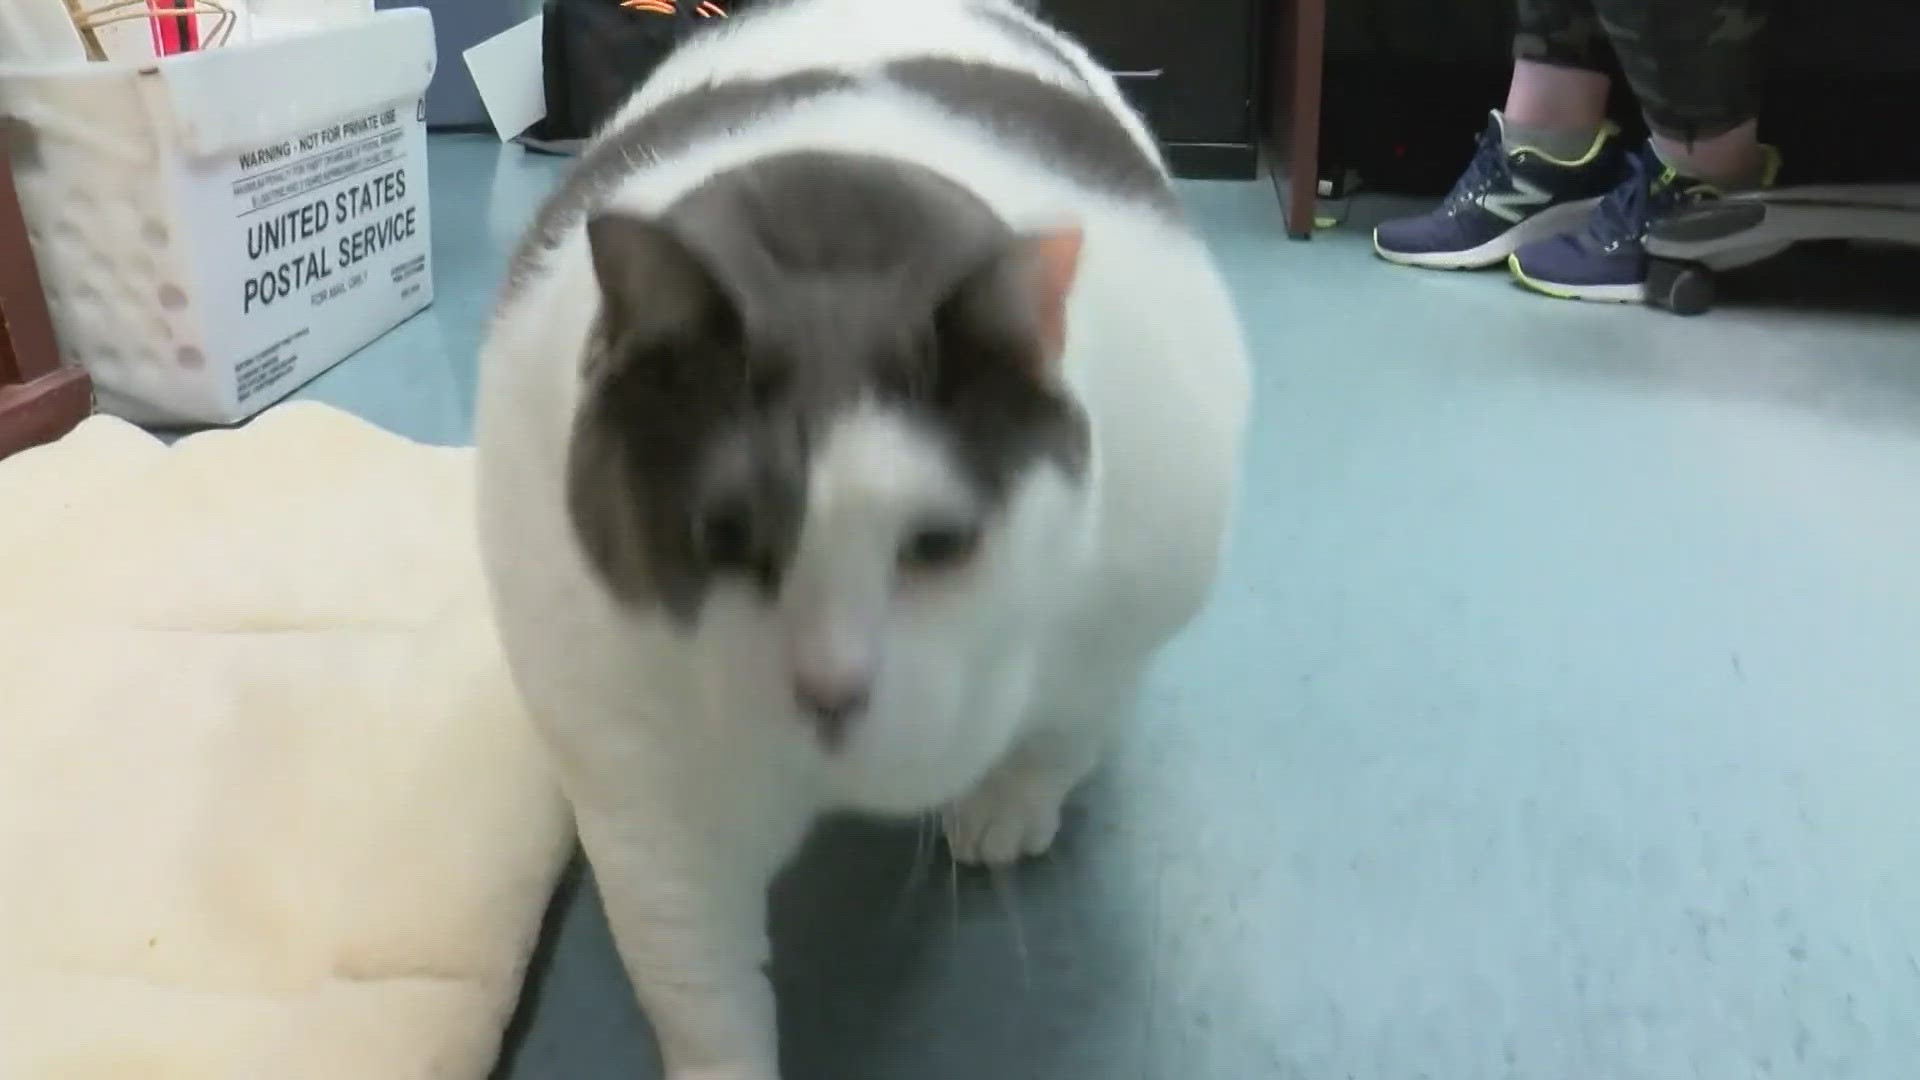 Patches the fat cat weighs in at over 40 pounds. His new owner is dedicated to helping the feline slim down.